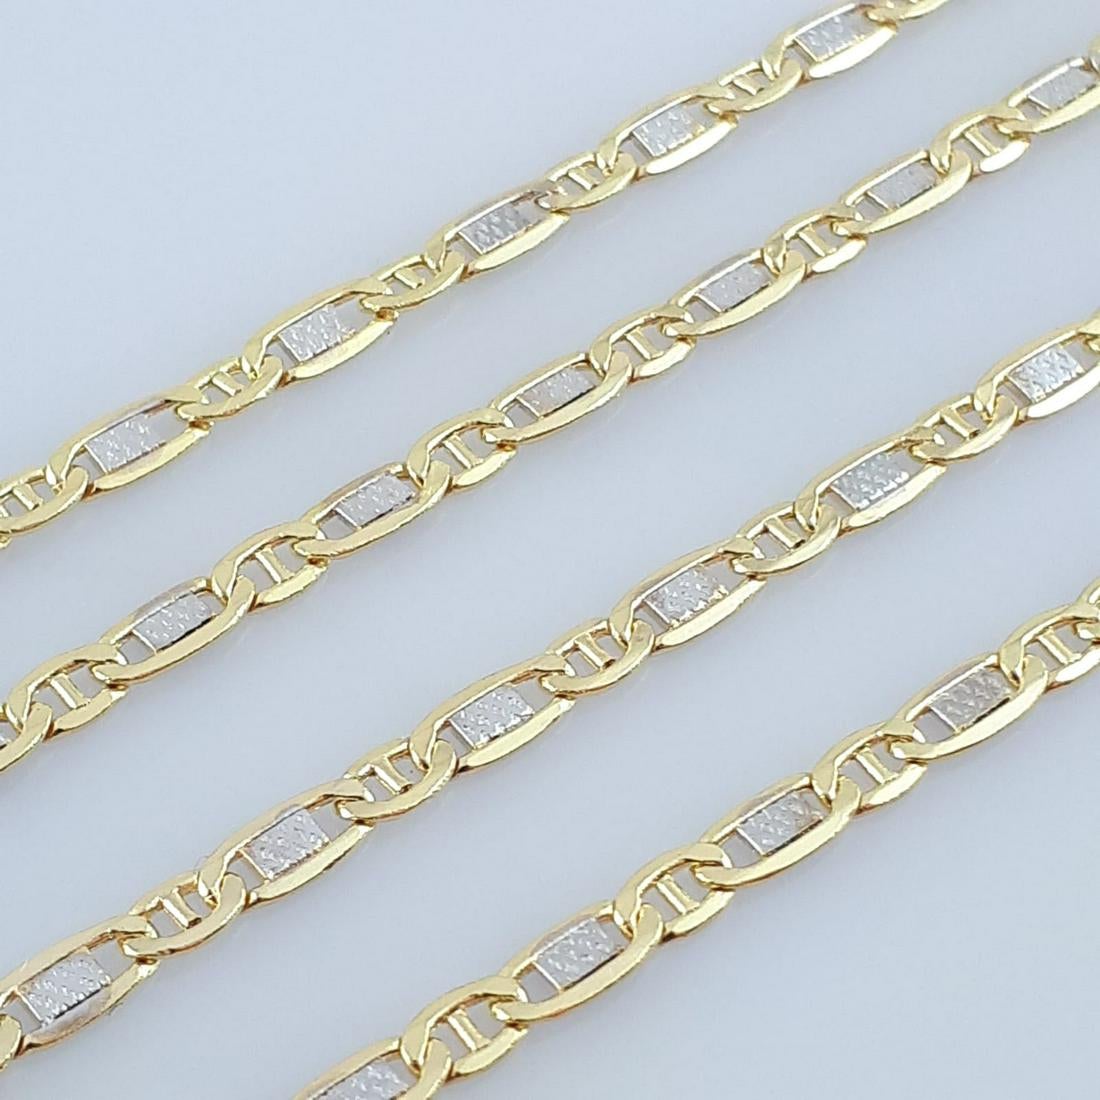 14K Yellow and White Gold - Necklace - Image 4 of 4